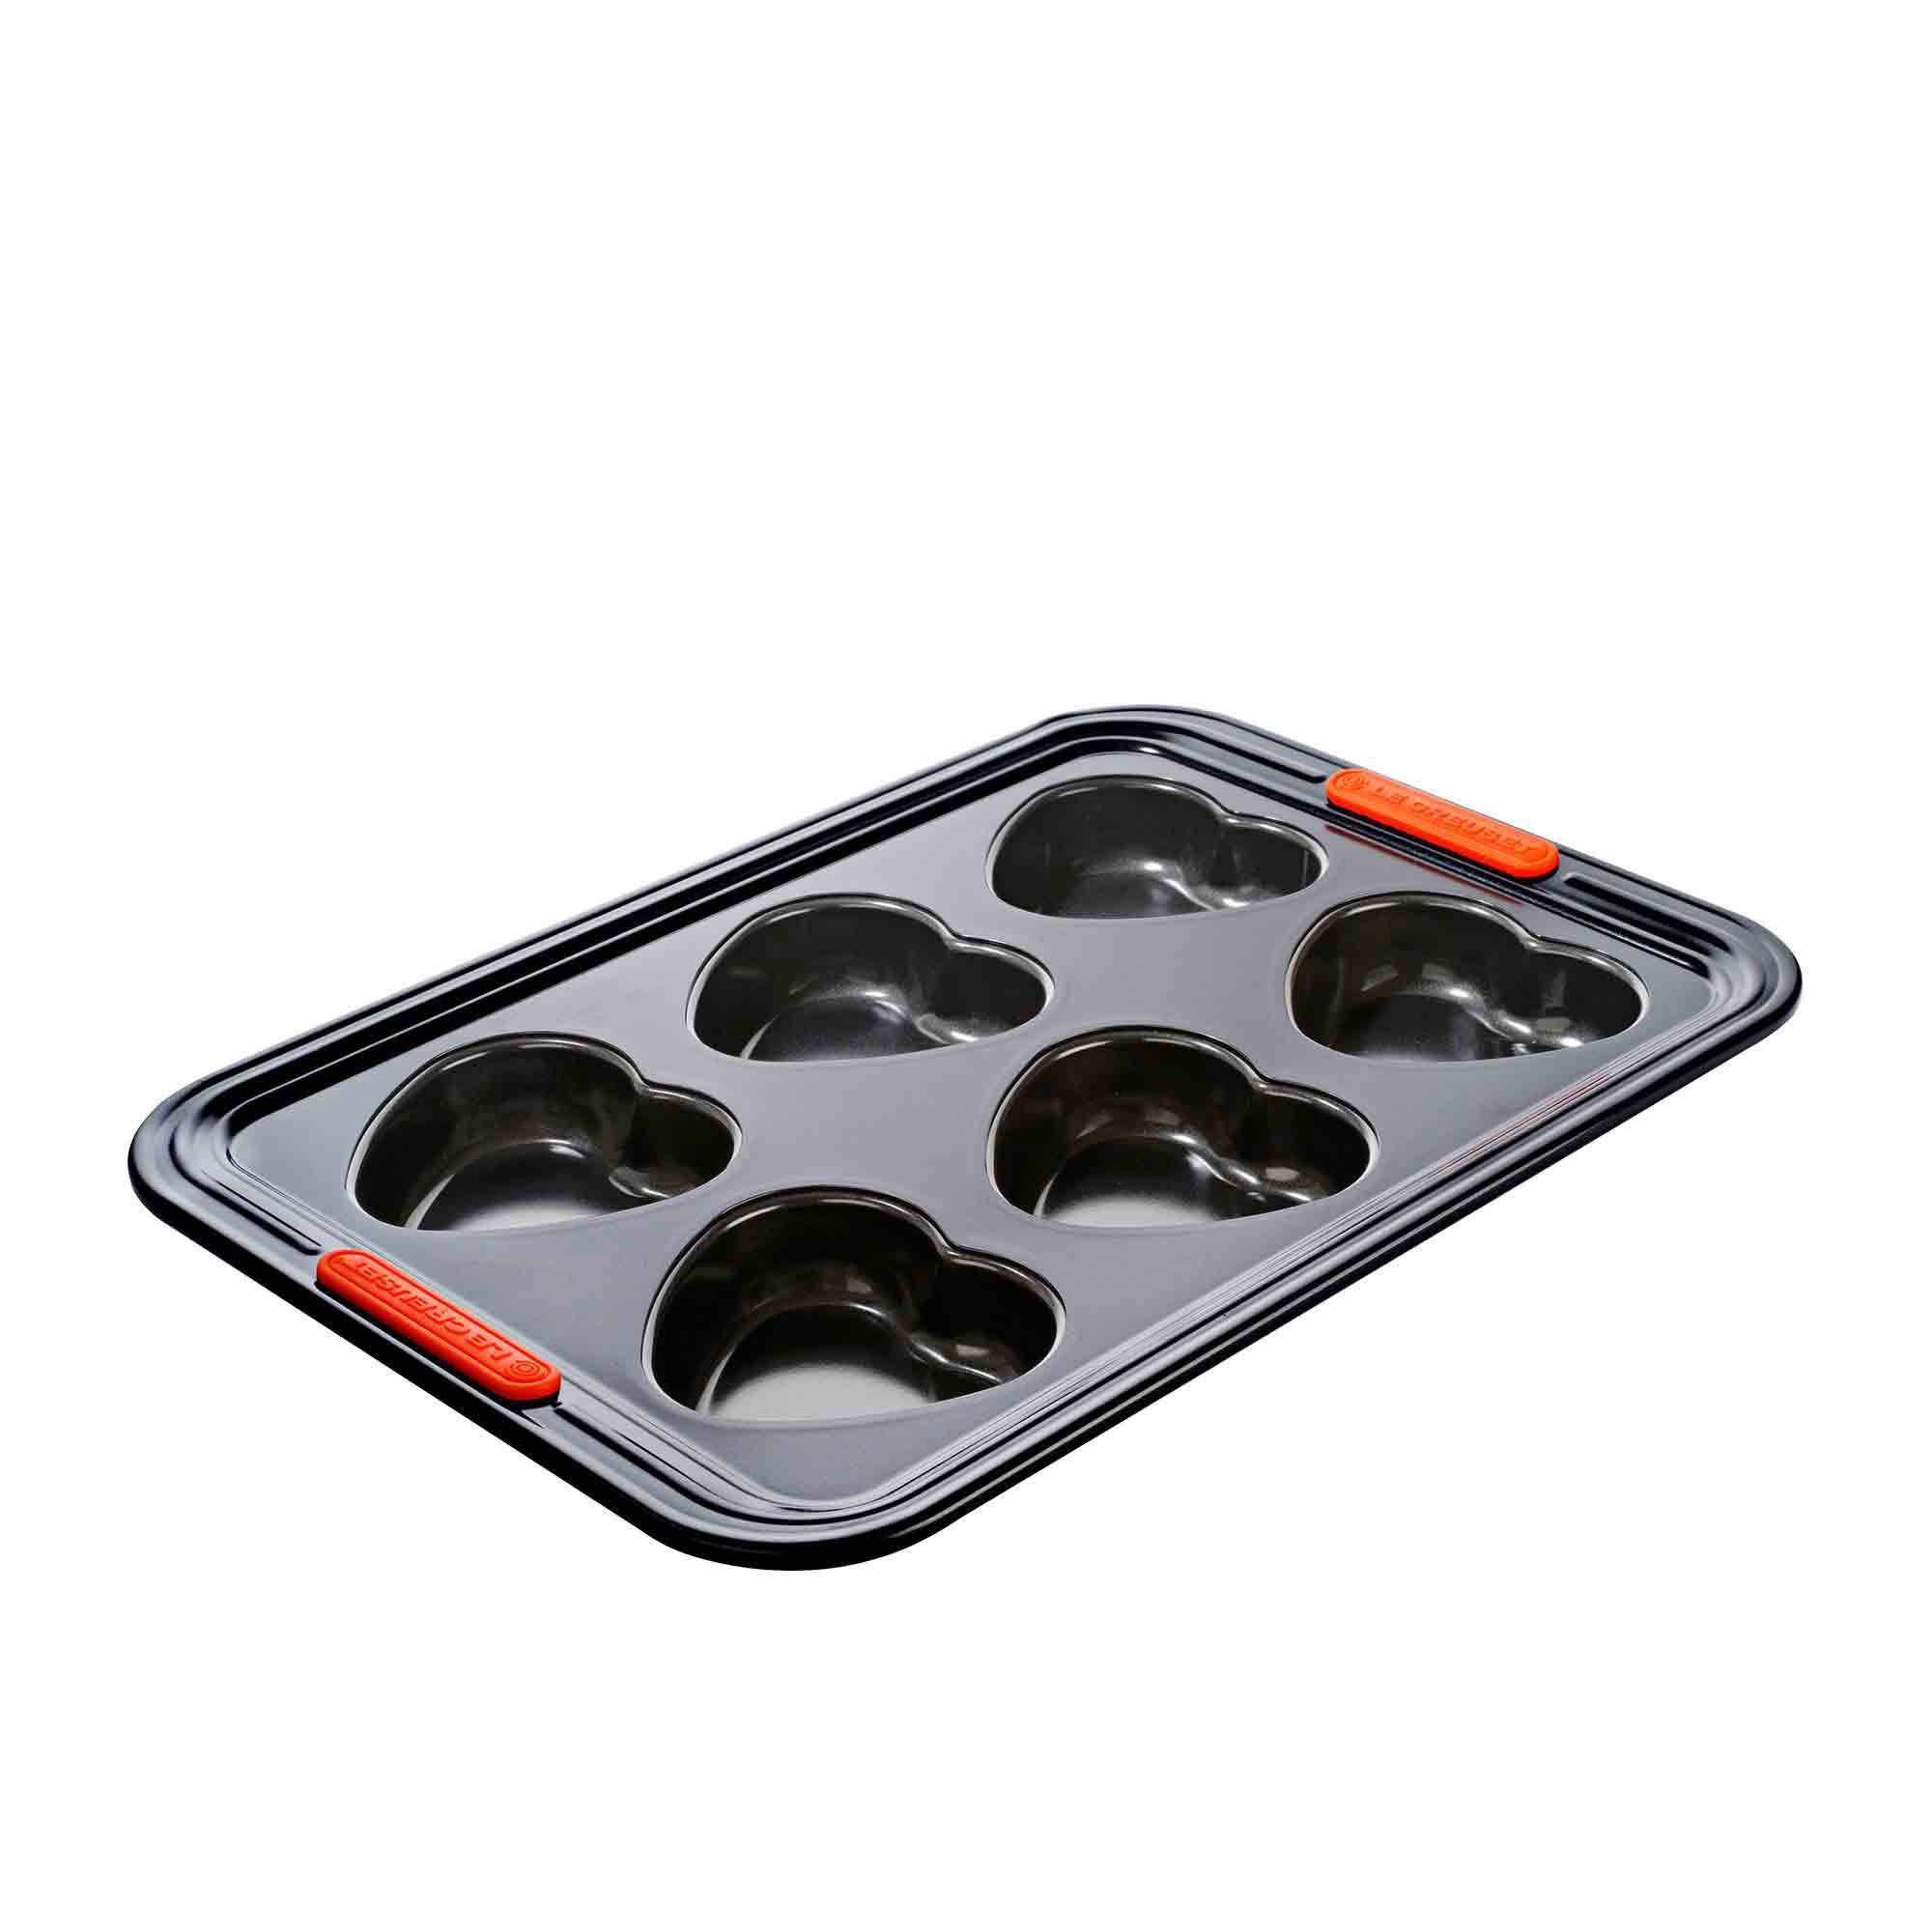 Le Creuset Toughened Non Stick Heart Shaped Muffin Tray 6 Cup Image 1